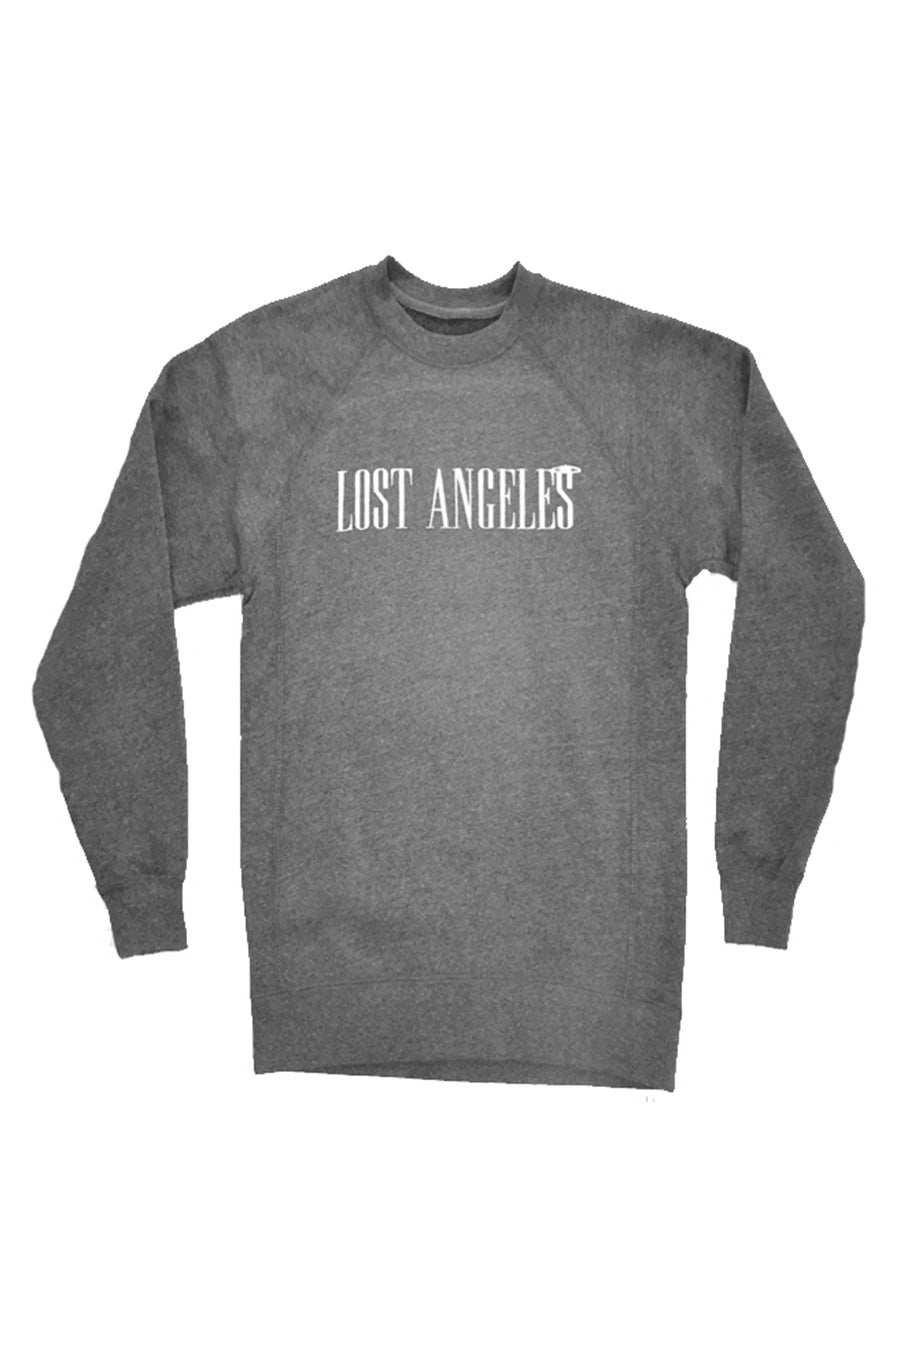 Lost Angeles Sweater | Grey - Main Image Number 1 of 1